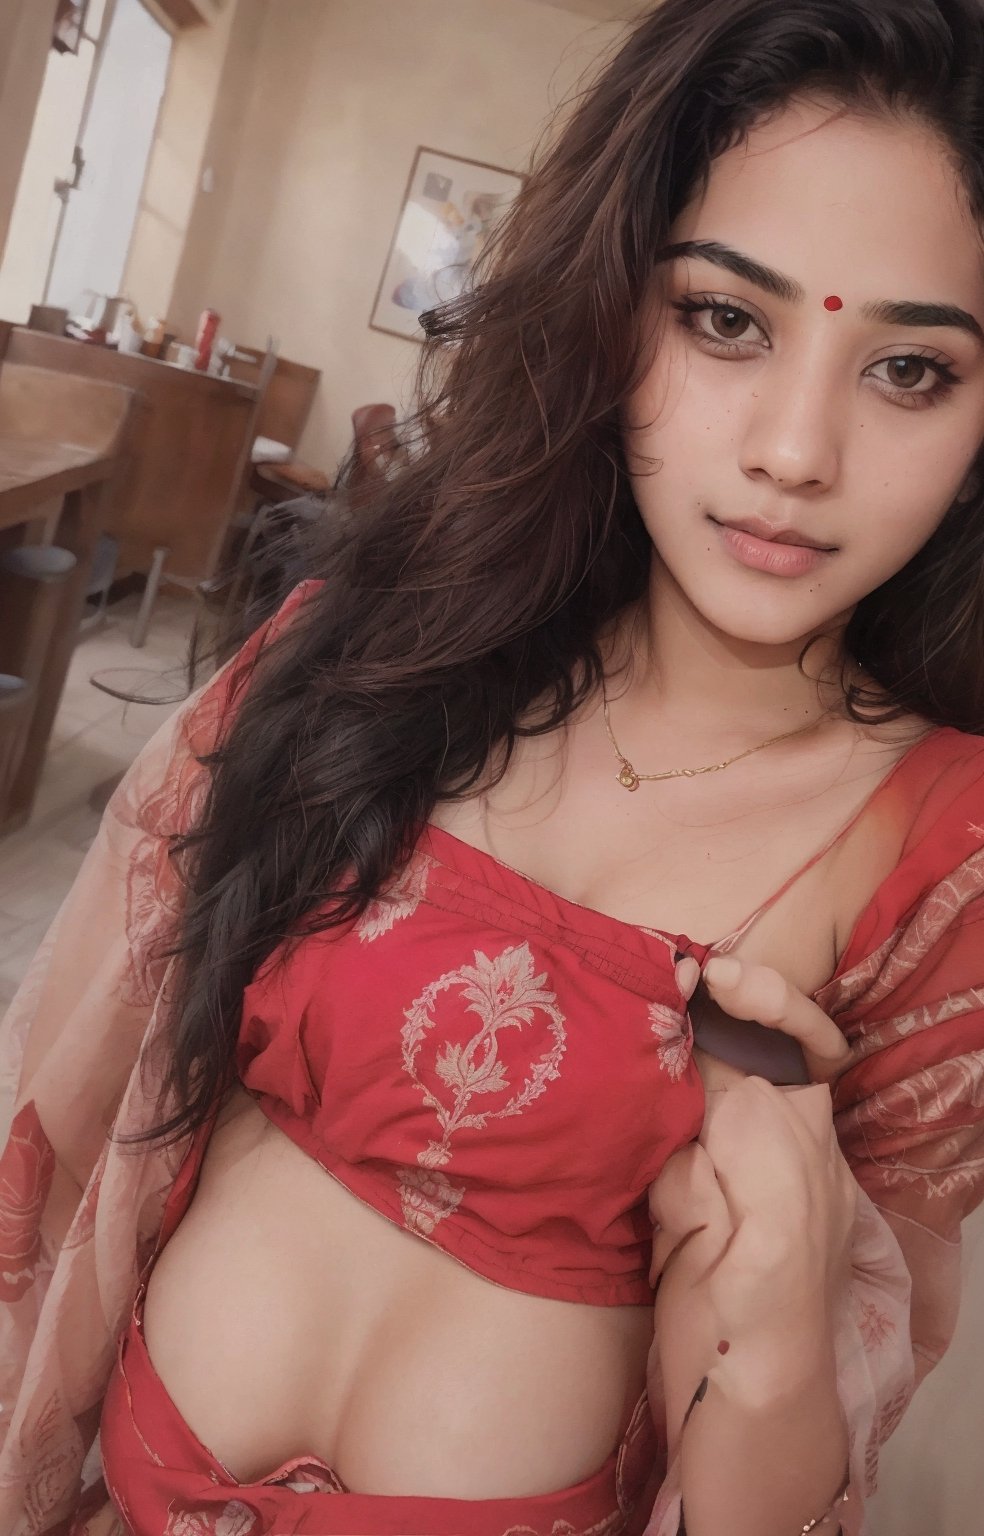 Beautiful cute young attractive Indian teenage girl villaga 18 years old cute Instagram model long block hair colorful hair warm dacing in home sit at safo Indian